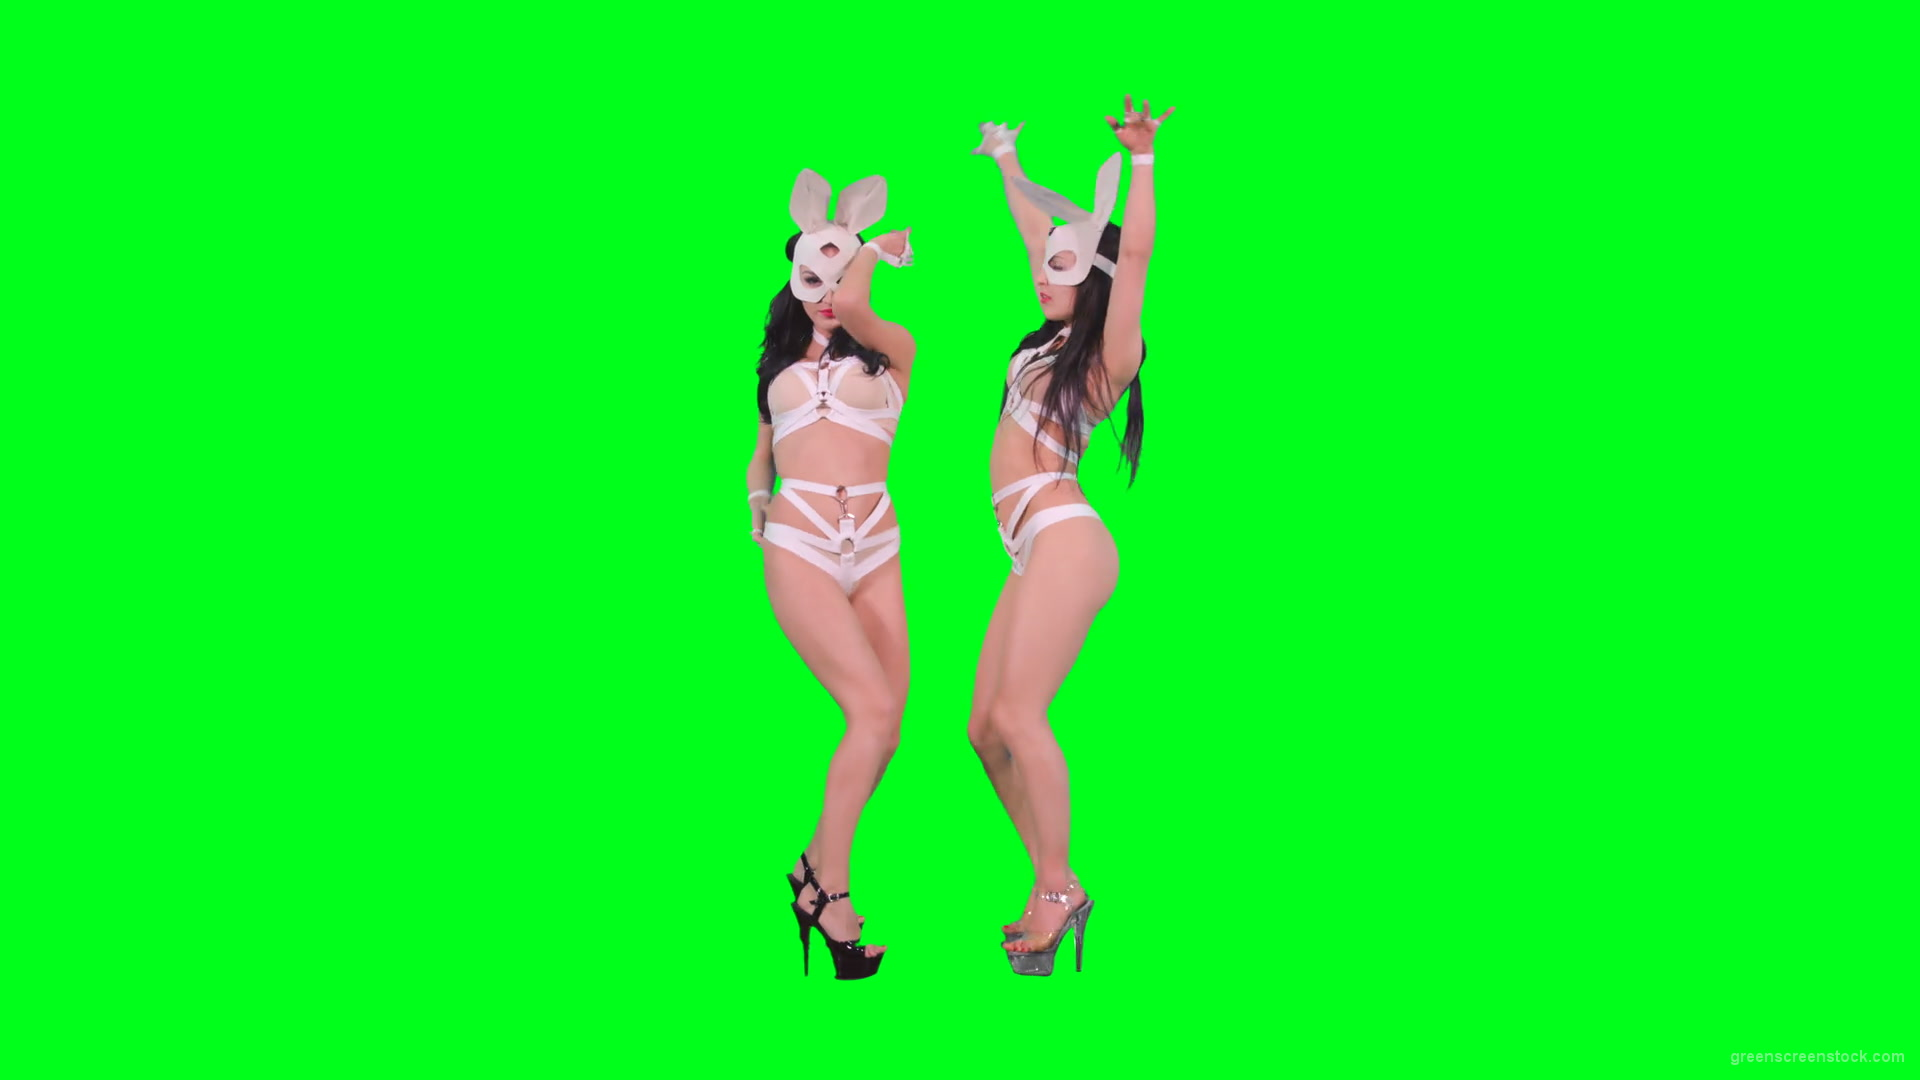 Light-erotic-girls-in-rabbit-playboy-costumes-on-green-screen-moving-sexy-4K-Video-Footage-1920_008 Green Screen Stock